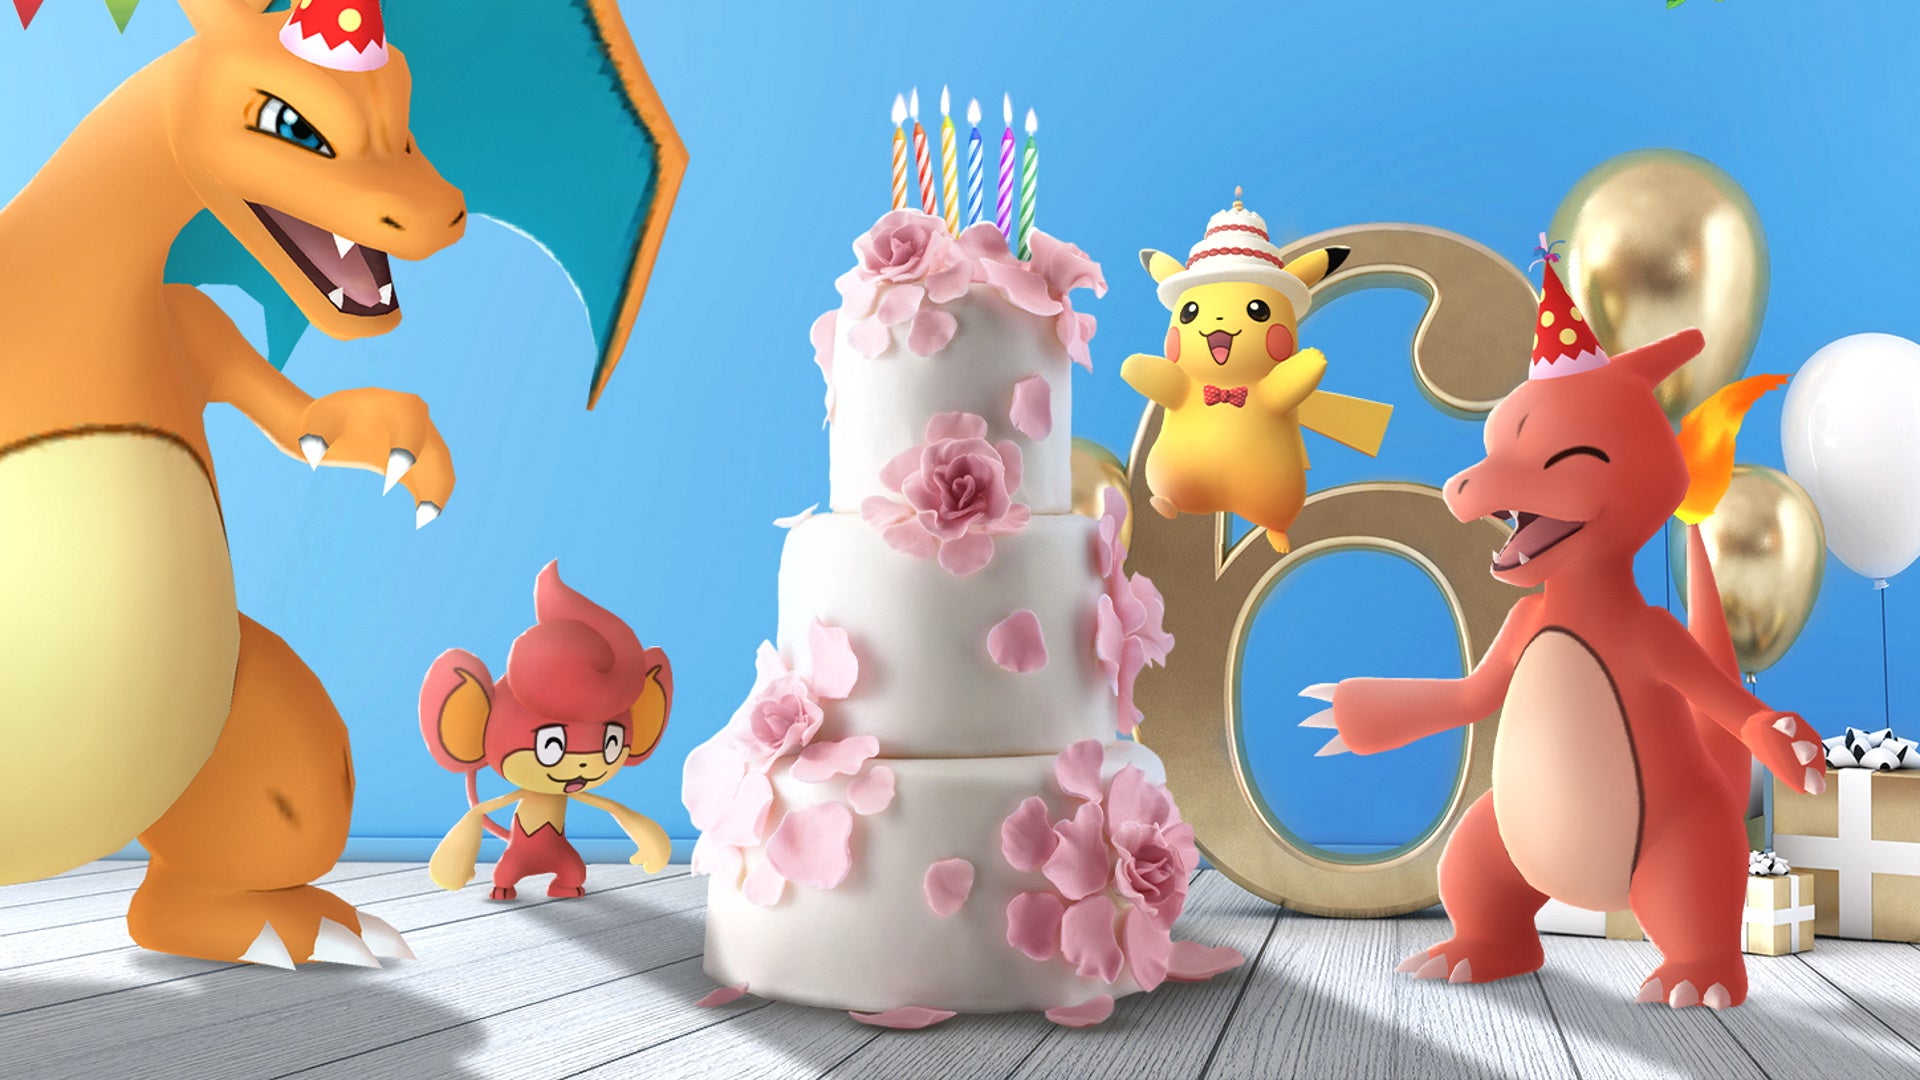 Image for Pokémon Go 6th Anniversary event steps, rewards and field research tasks